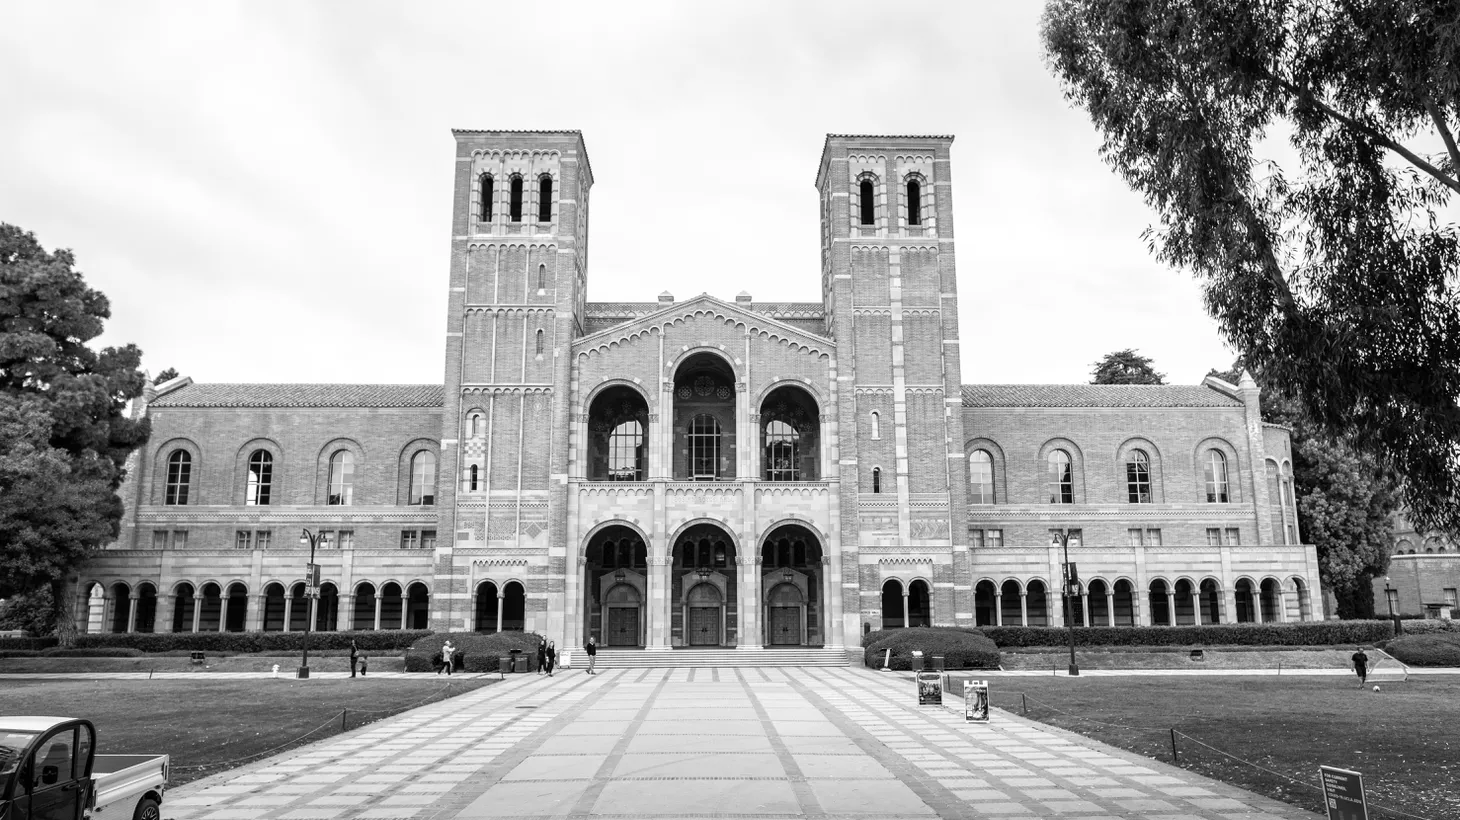 UCLA’s Royce Hall is seen on an overcast day, January 29, 2022. Members of the UCLA Disabled Students Union are demanding a permanent hybrid option of remote and in-person learning.